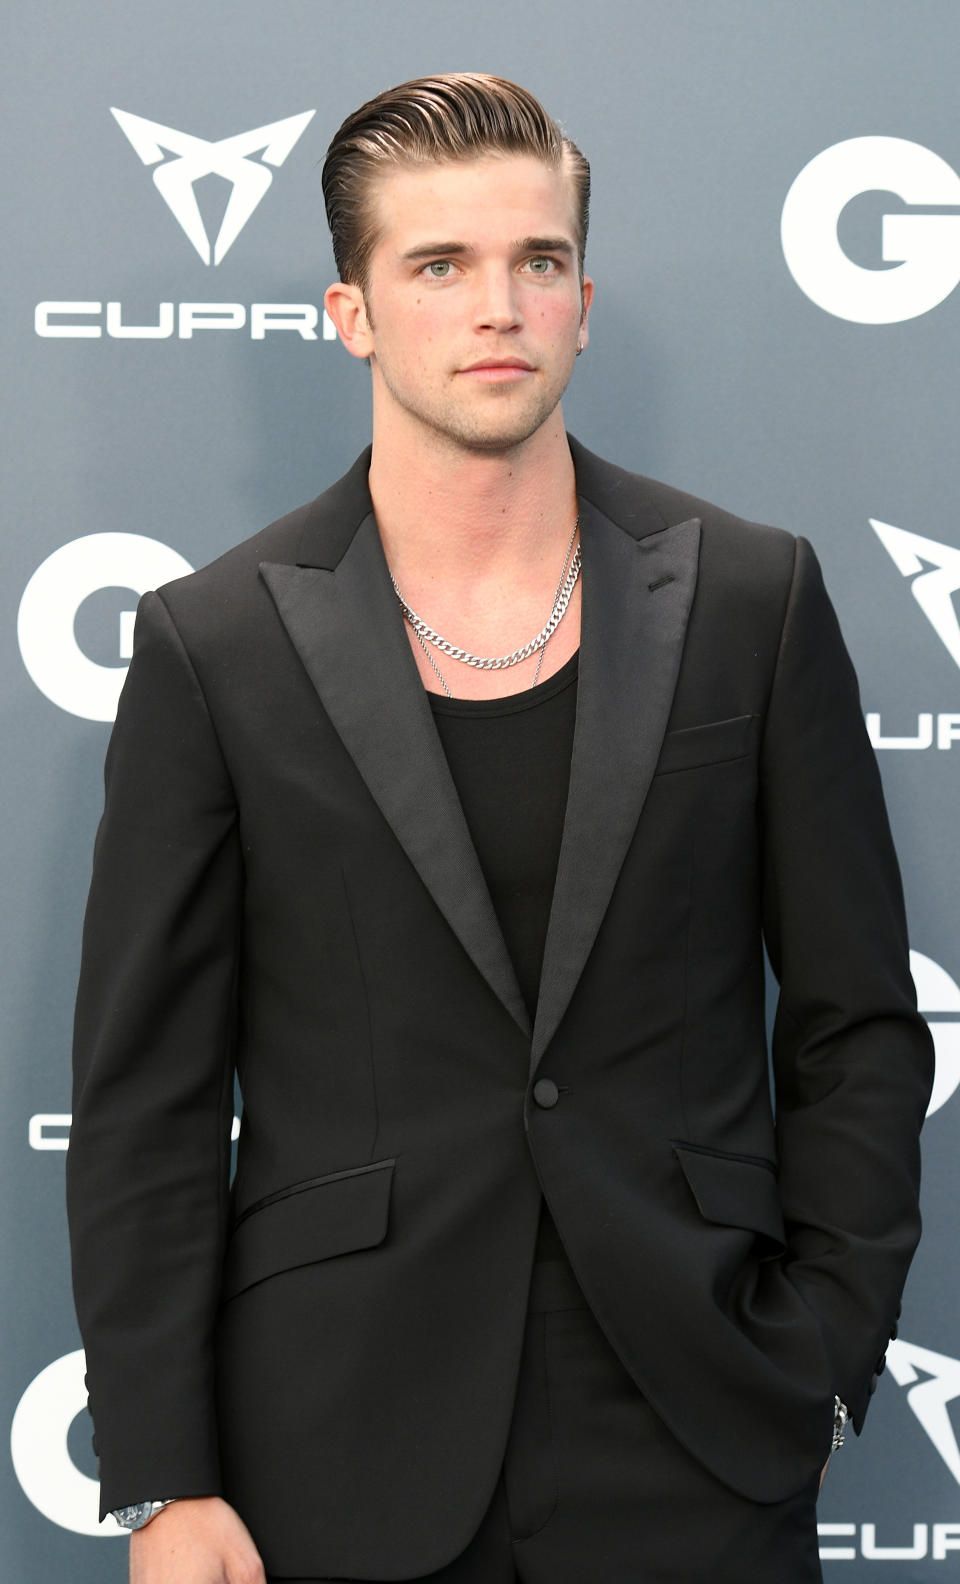 MADRID, SPAIN - JULY 09: River Viiperi attends GQ 25th anniversary party on July 09, 2019 in Madrid, Spain. (Photo by Europa Press Entertainment/Europa Press via Getty Images)